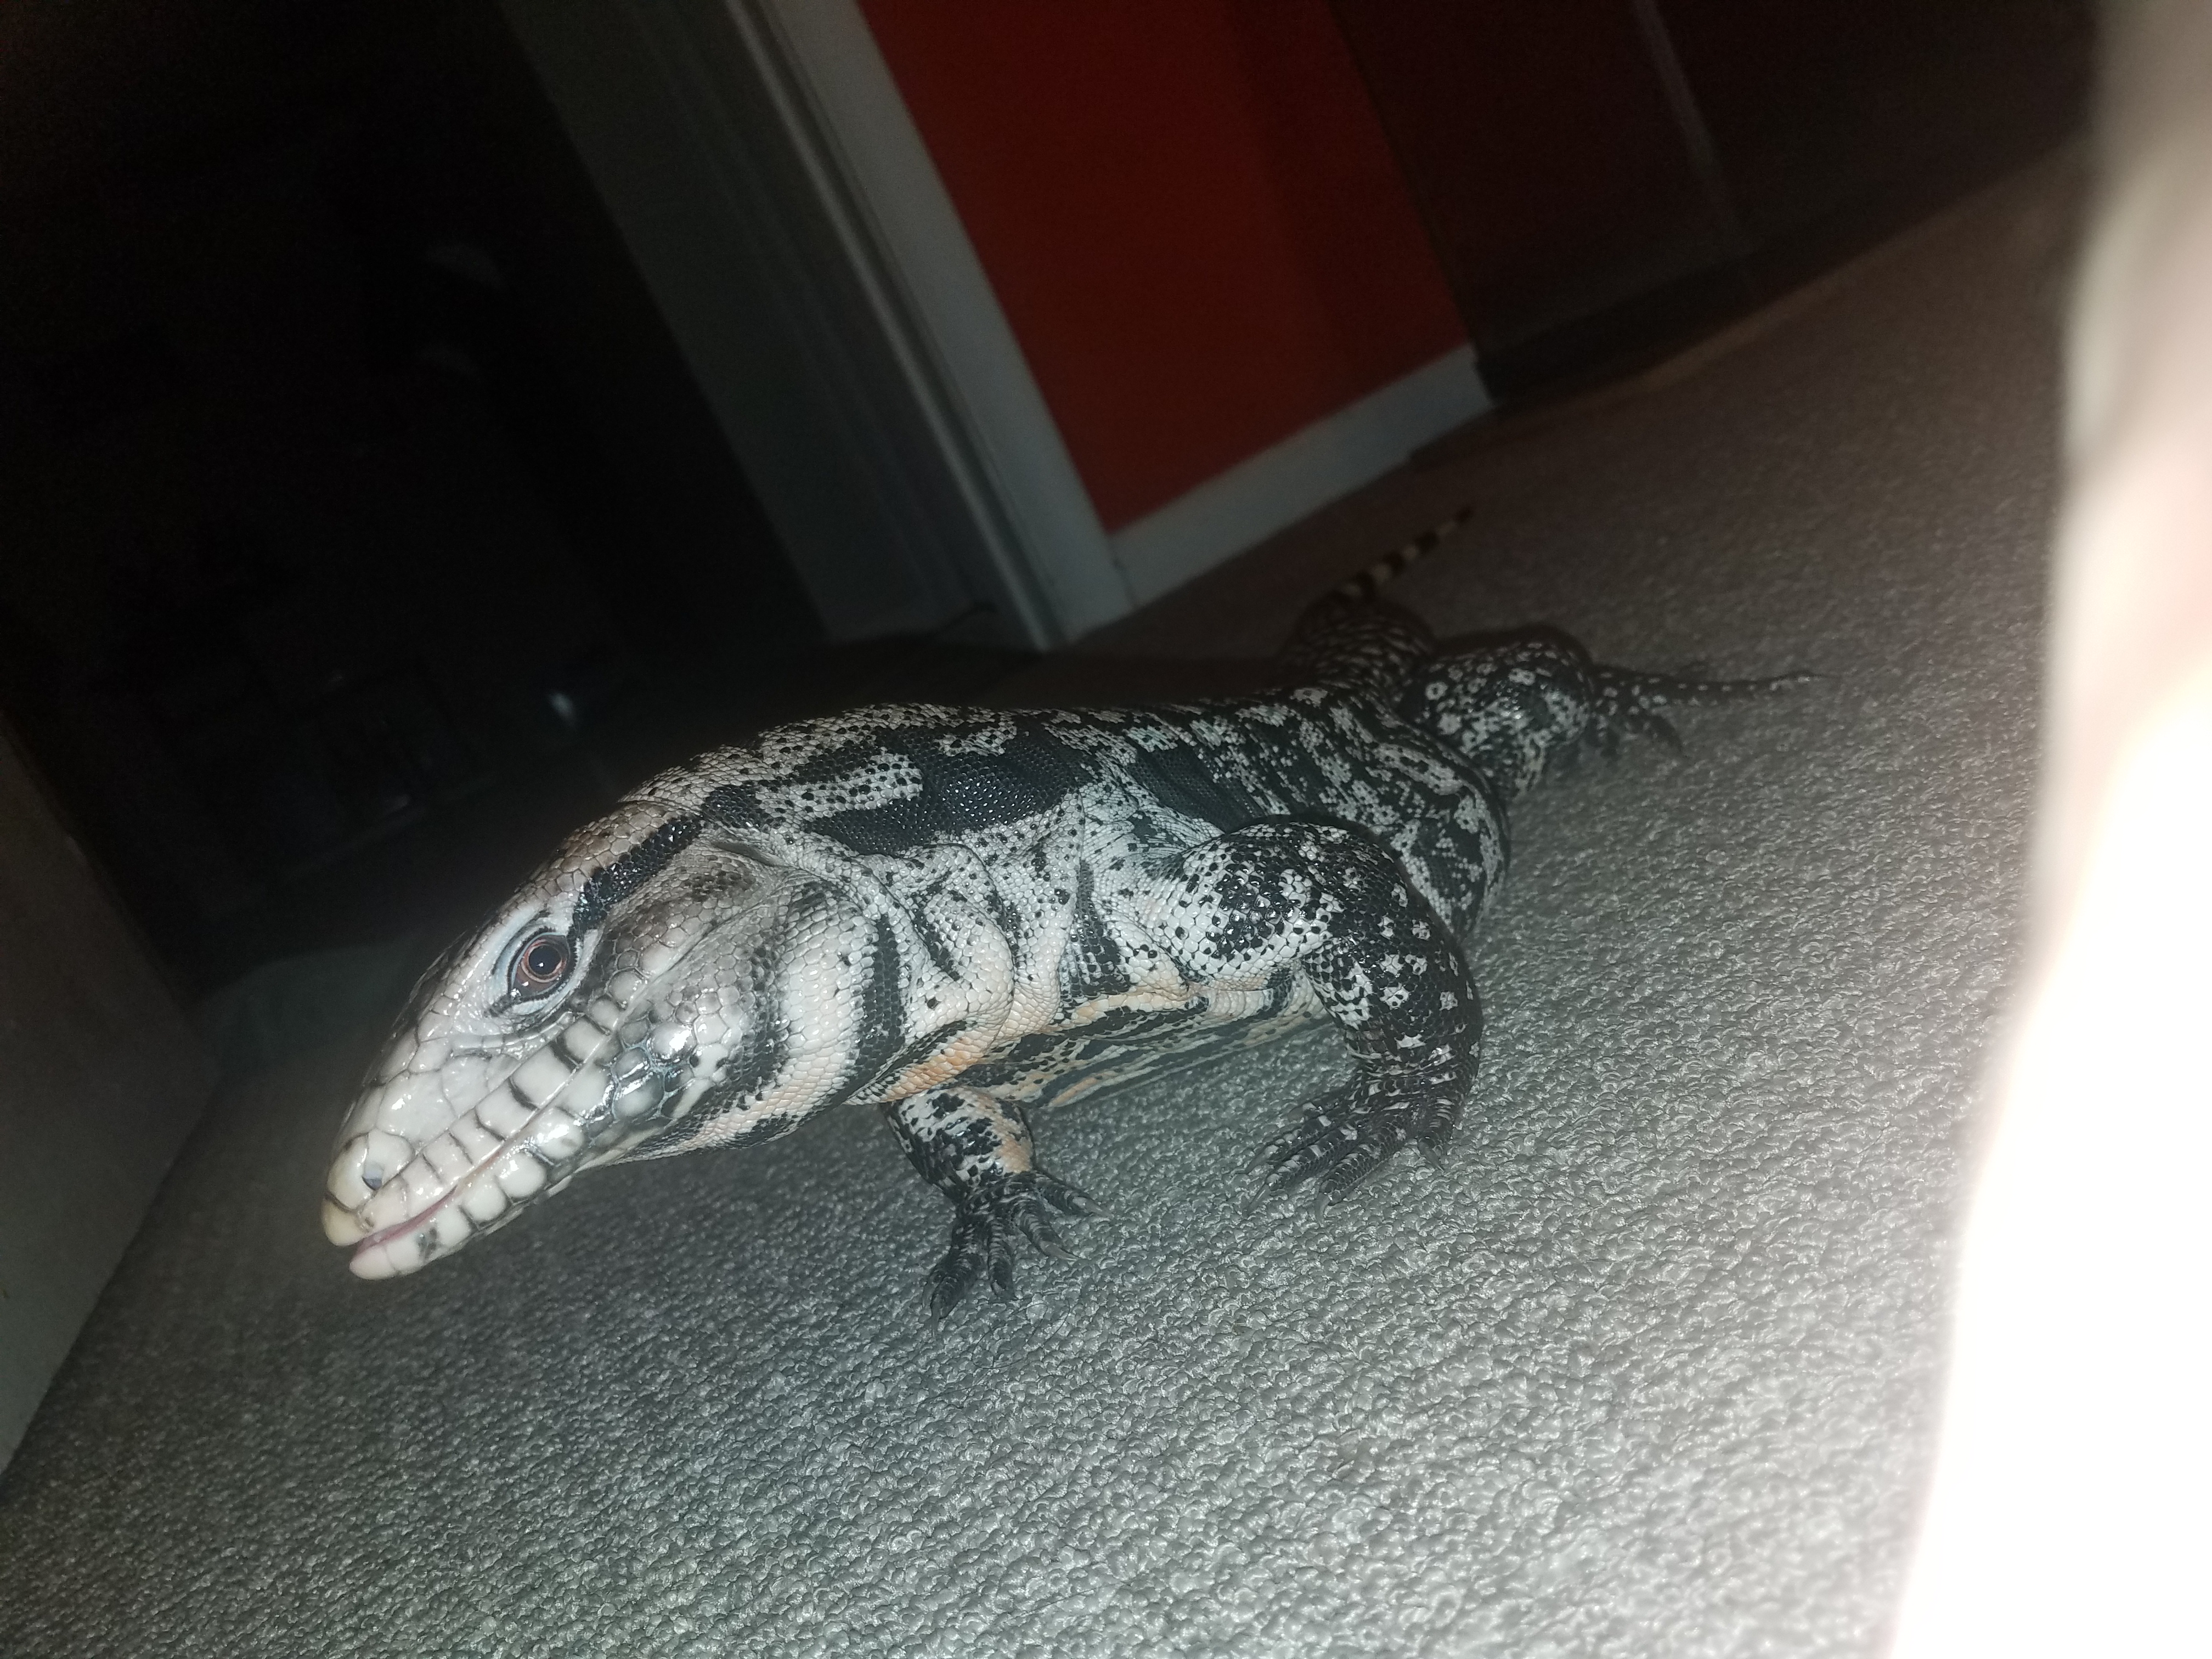 Can anyone identify what type of tegu I have on my hands?